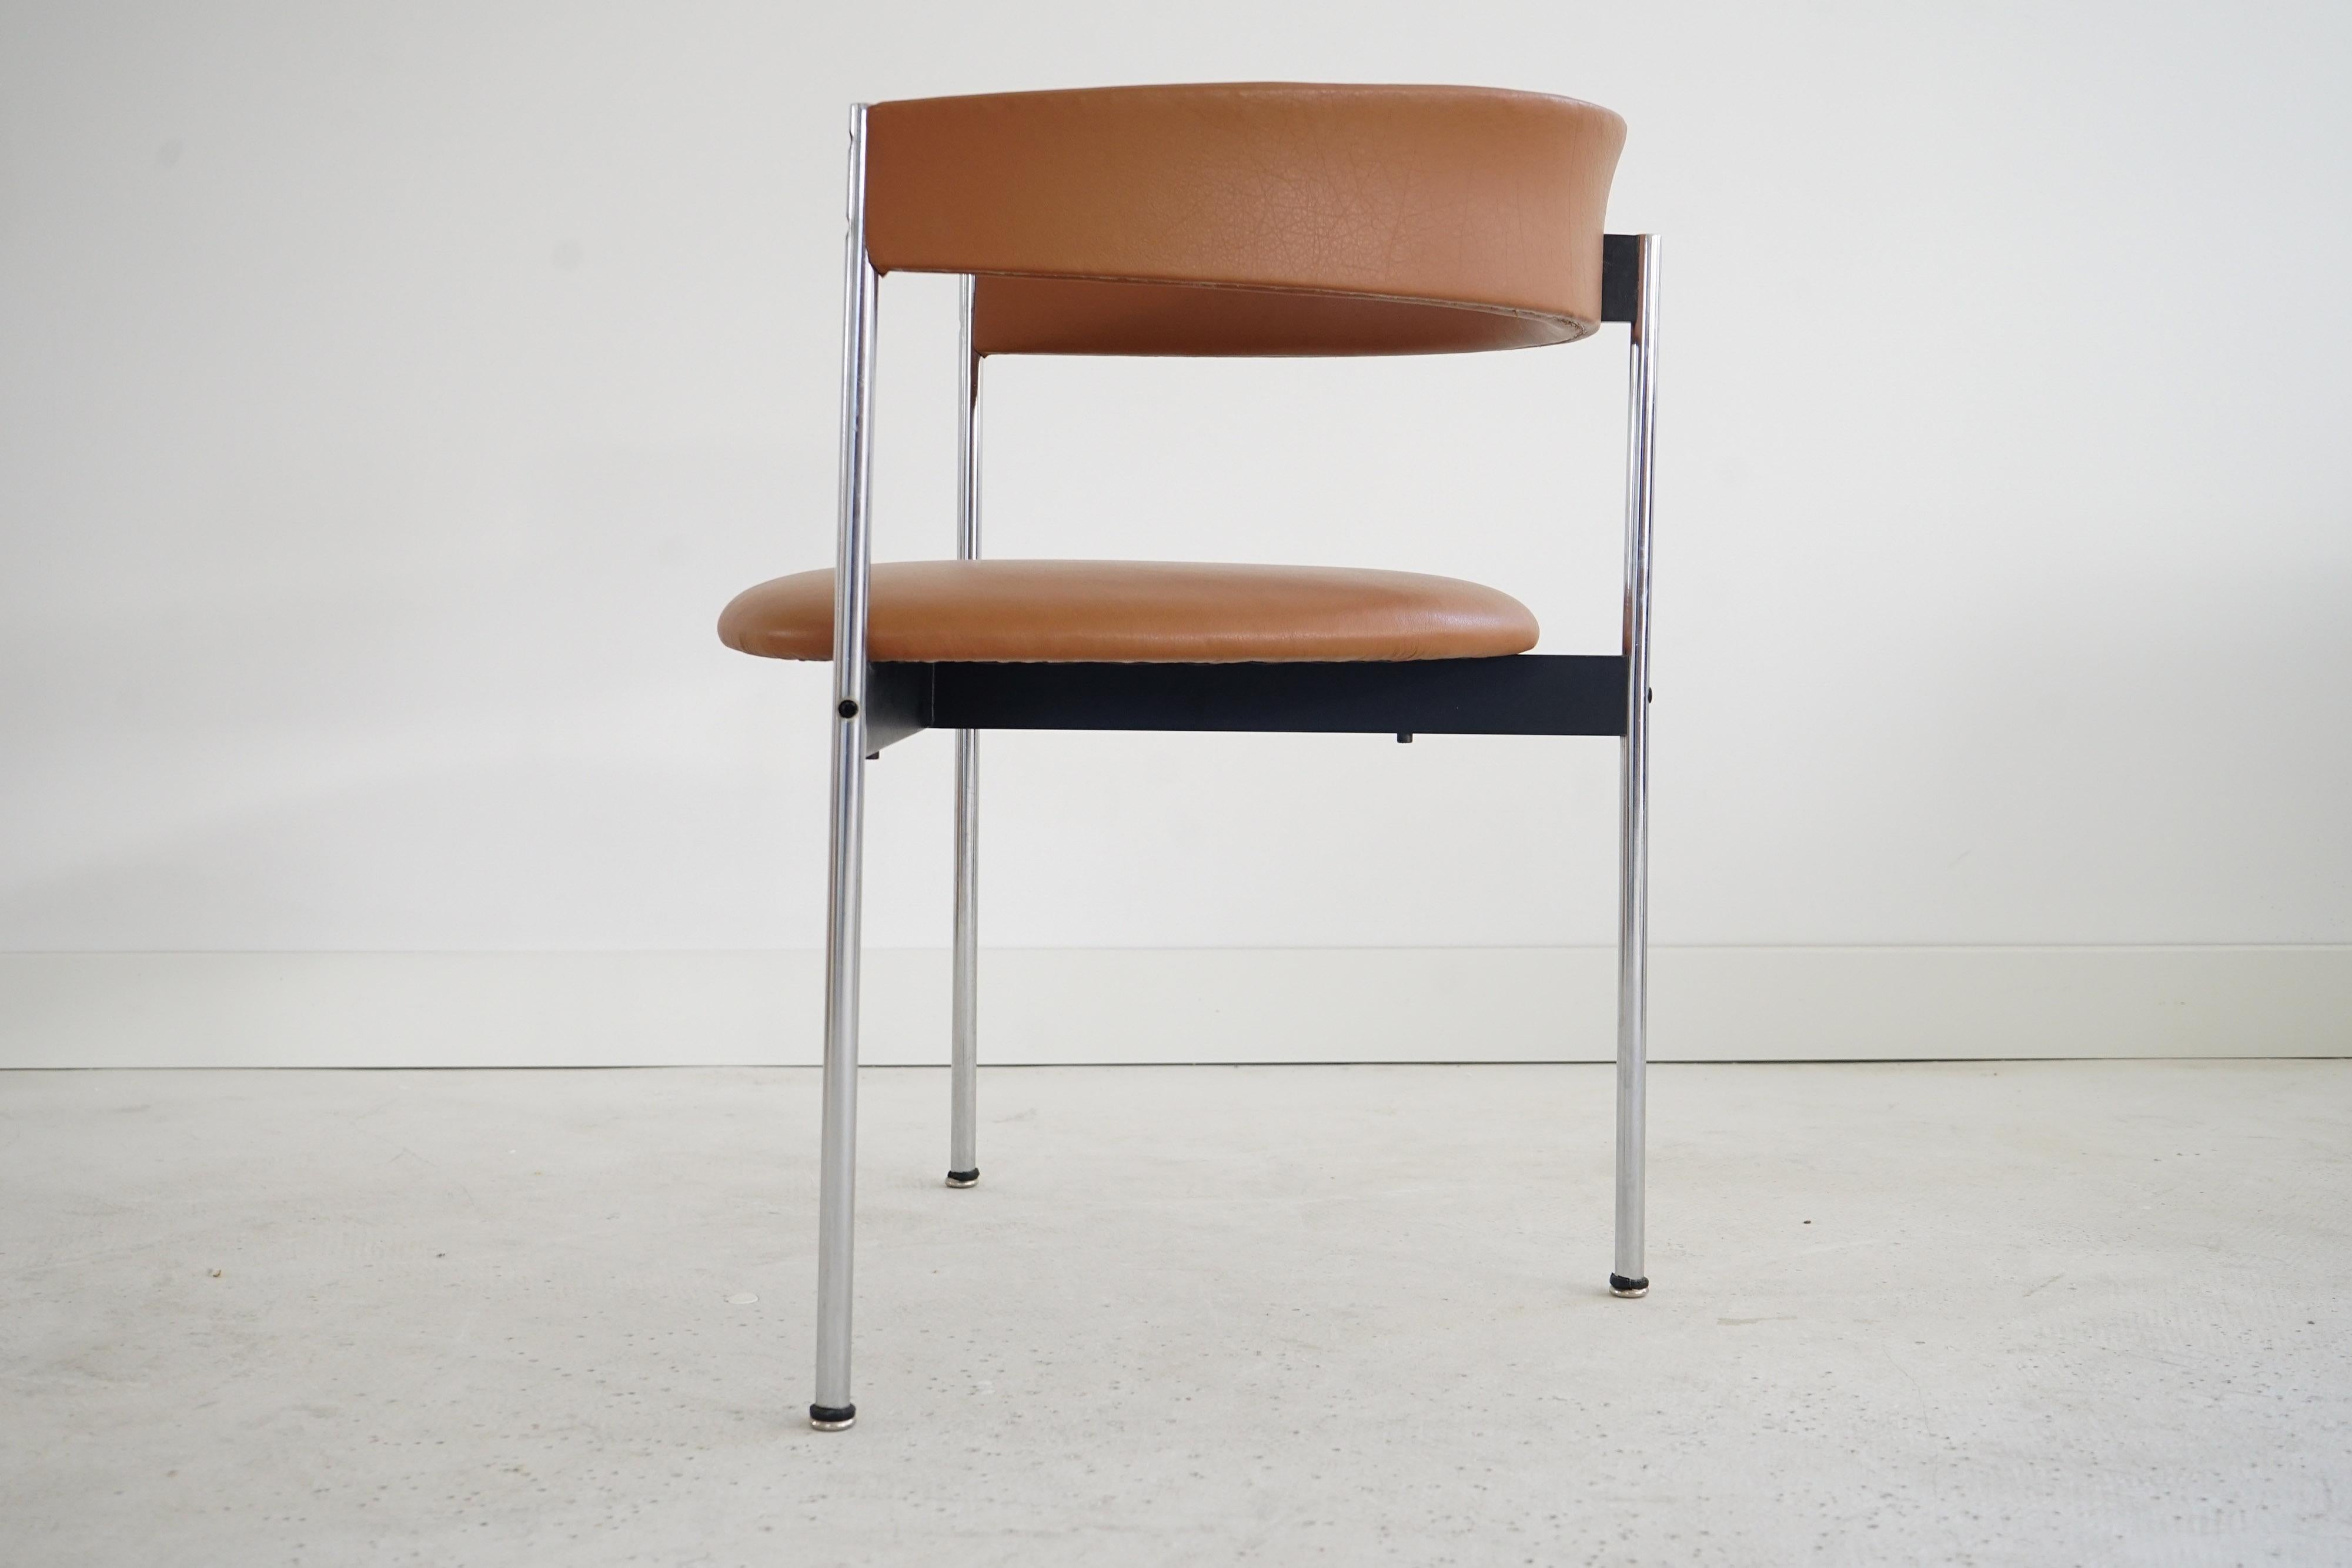 Four Mid-Century Three-legged Chairs by Dieter Waeckerlin for Idealheim, 1970s In Good Condition For Sale In Munster, DE